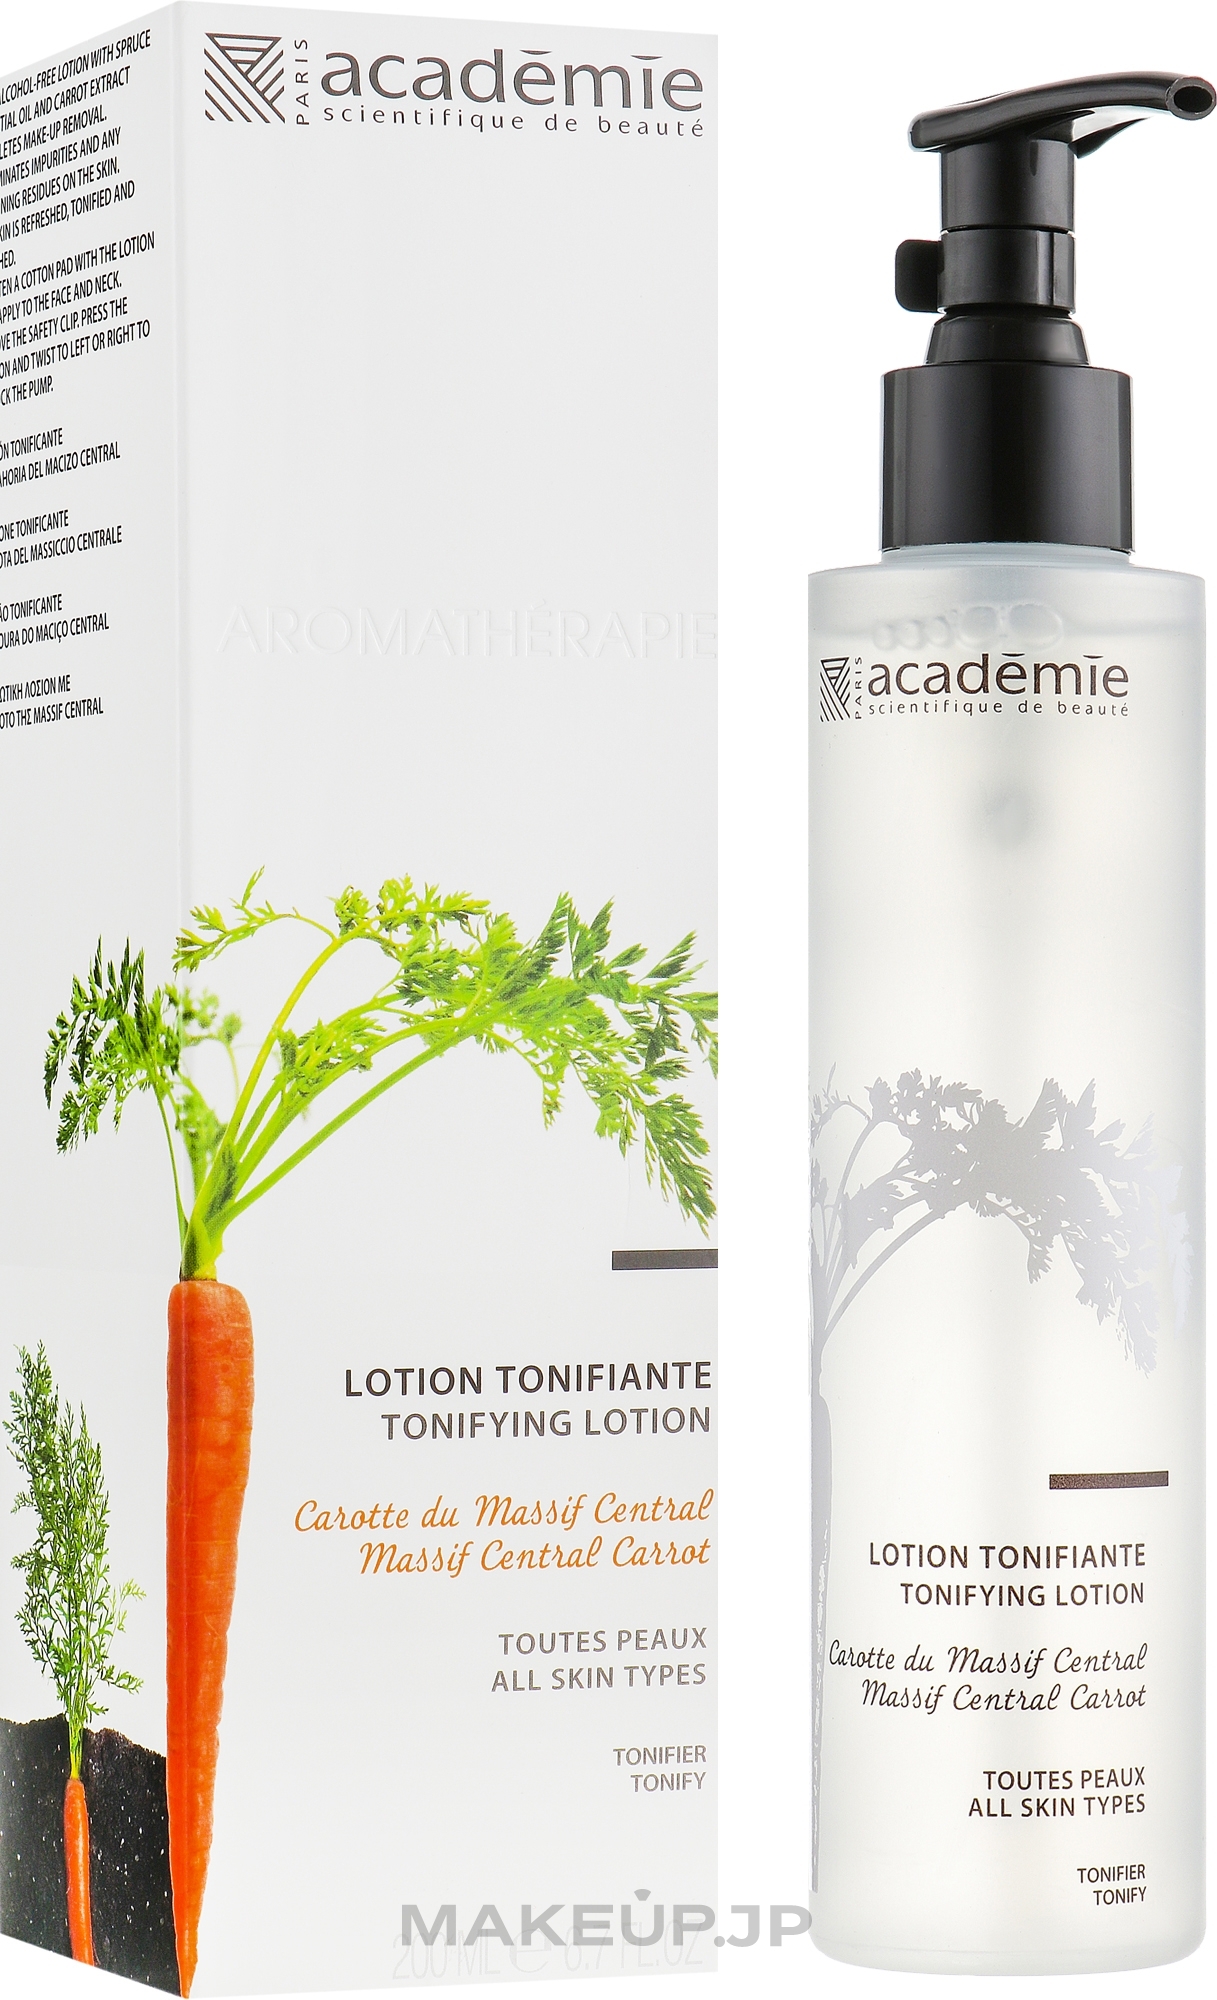 Mattifying Lotion "Massif Central Carrot" - Academie Lotion tonifi ante — photo 200 ml